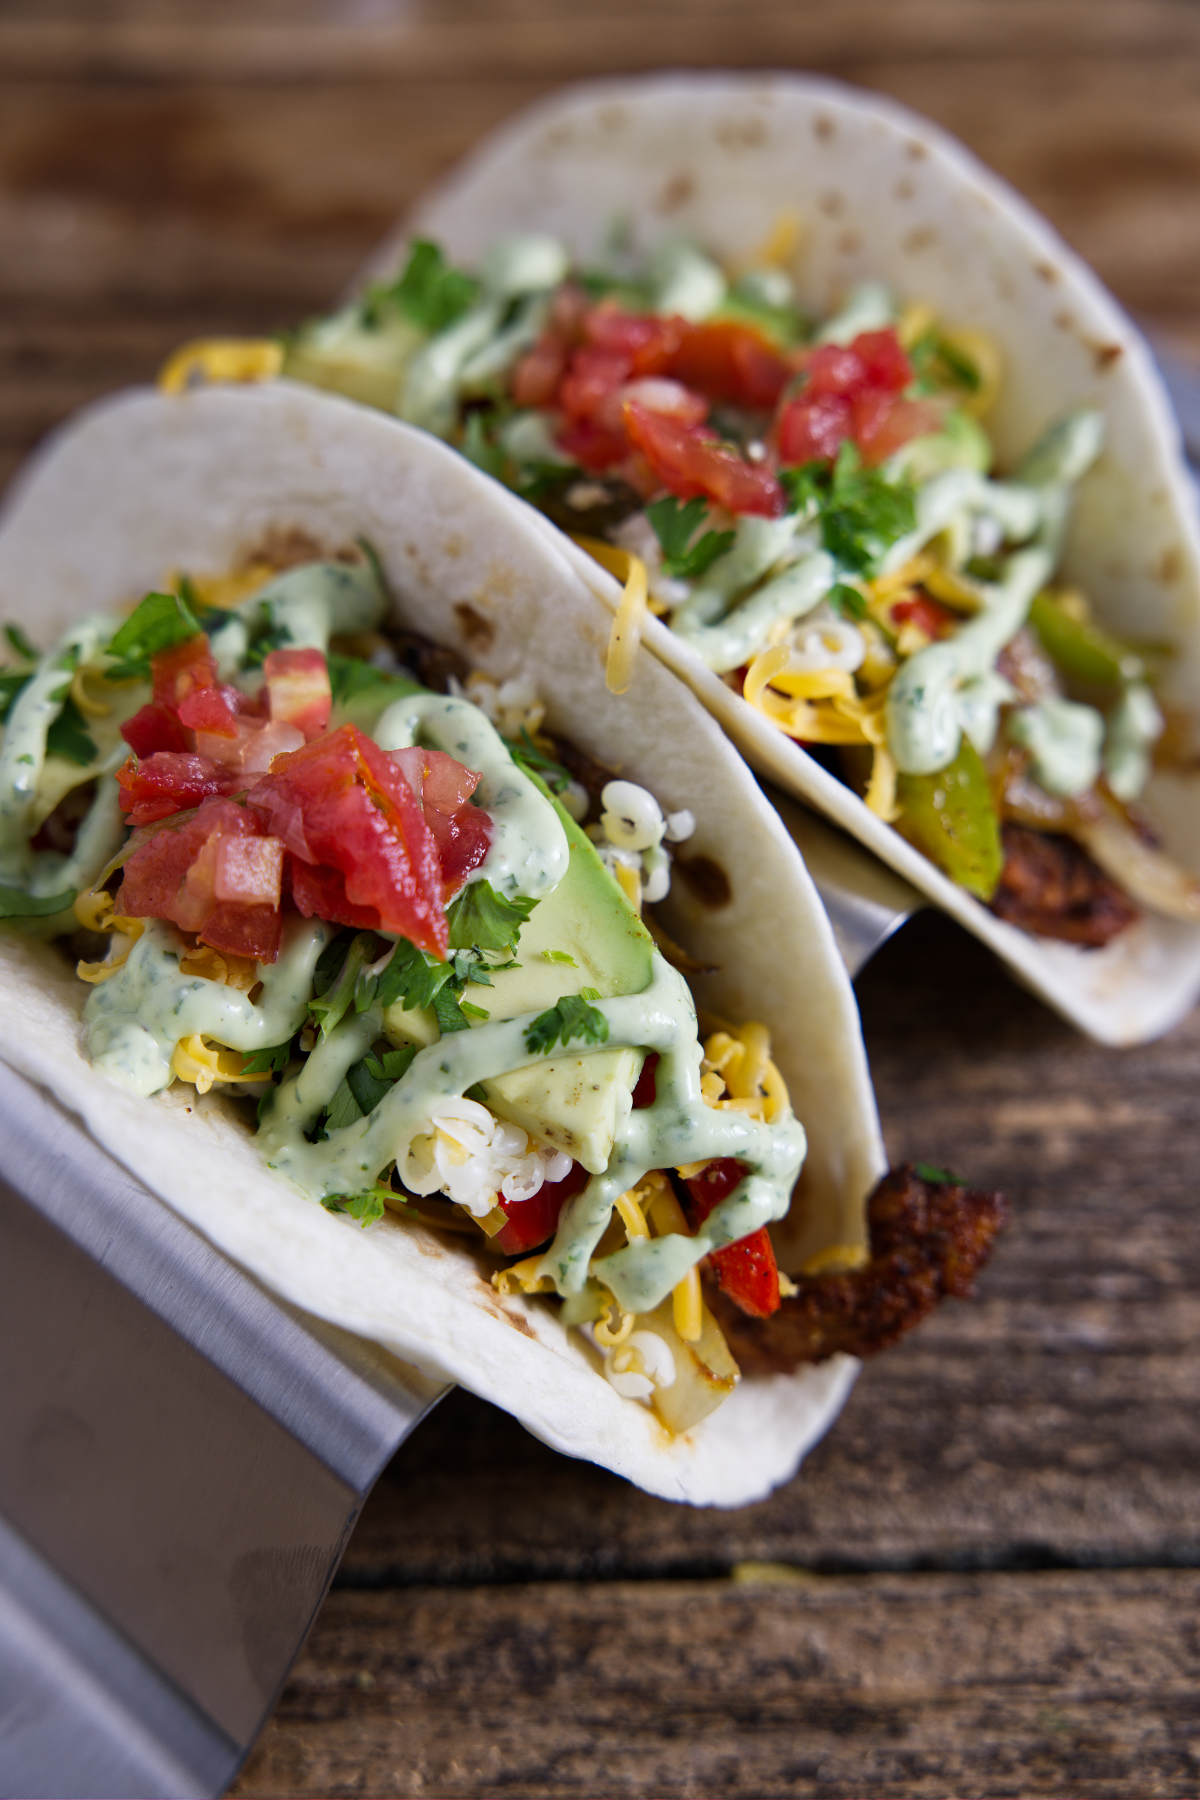 Delicious Blackstone Fajitas served in tortillas, garnished with avocado crema and vibrant bell peppers.